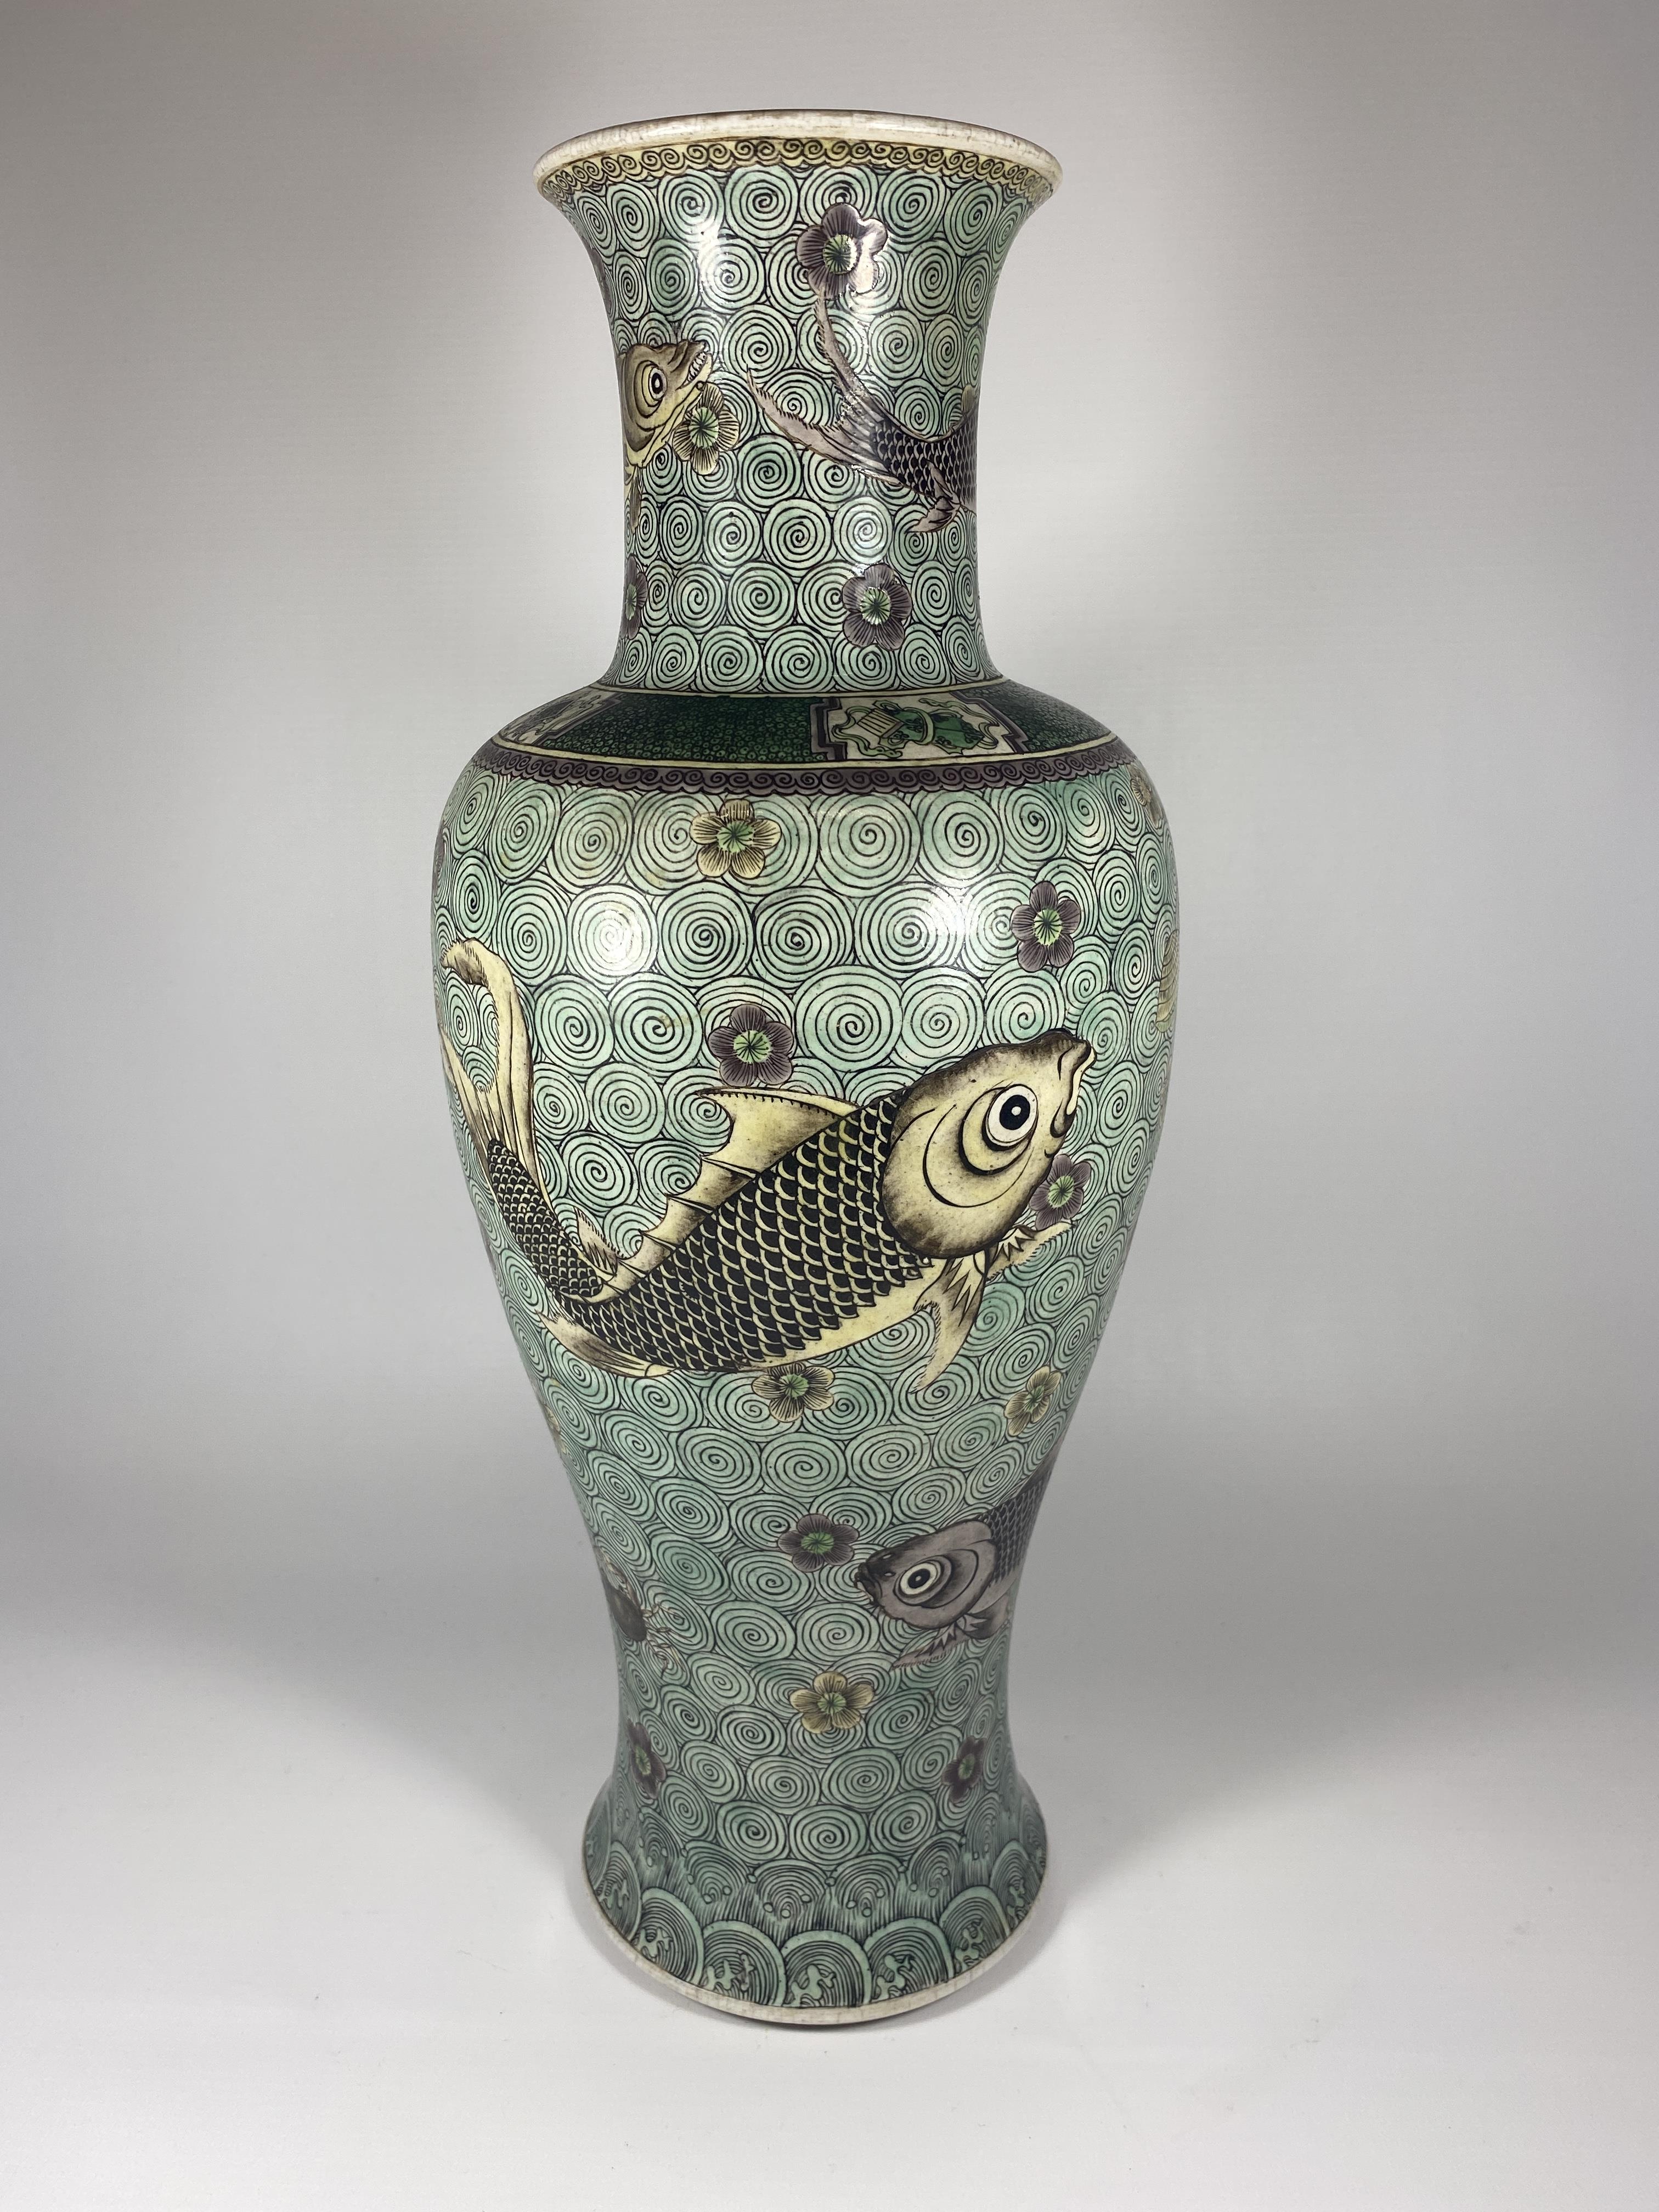 A LARGE MID 19TH CENTURY CHINESE BALUSTER FORM VASE WITH ENAMEL FISH ON A GEOMETRIC CIRCLES